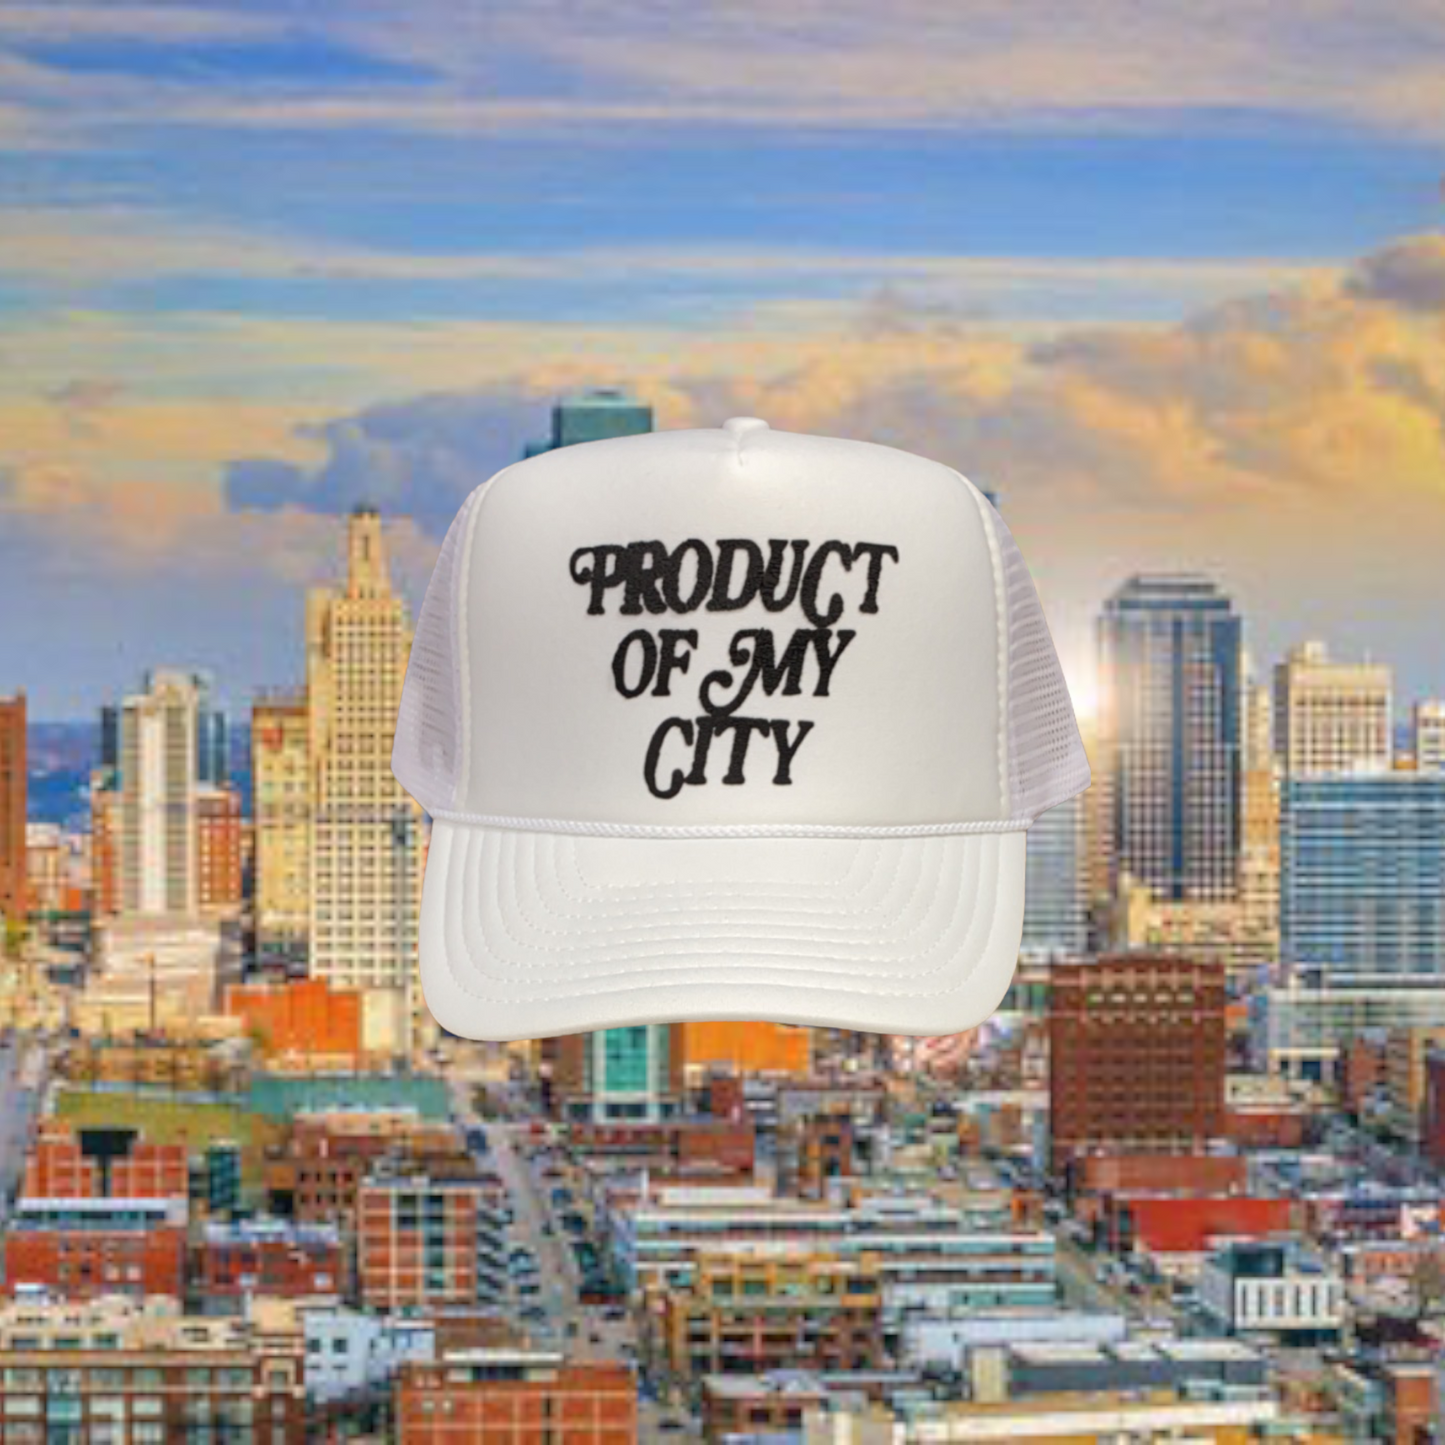 "PRODUCT OF MY CITY" Trucker Hats